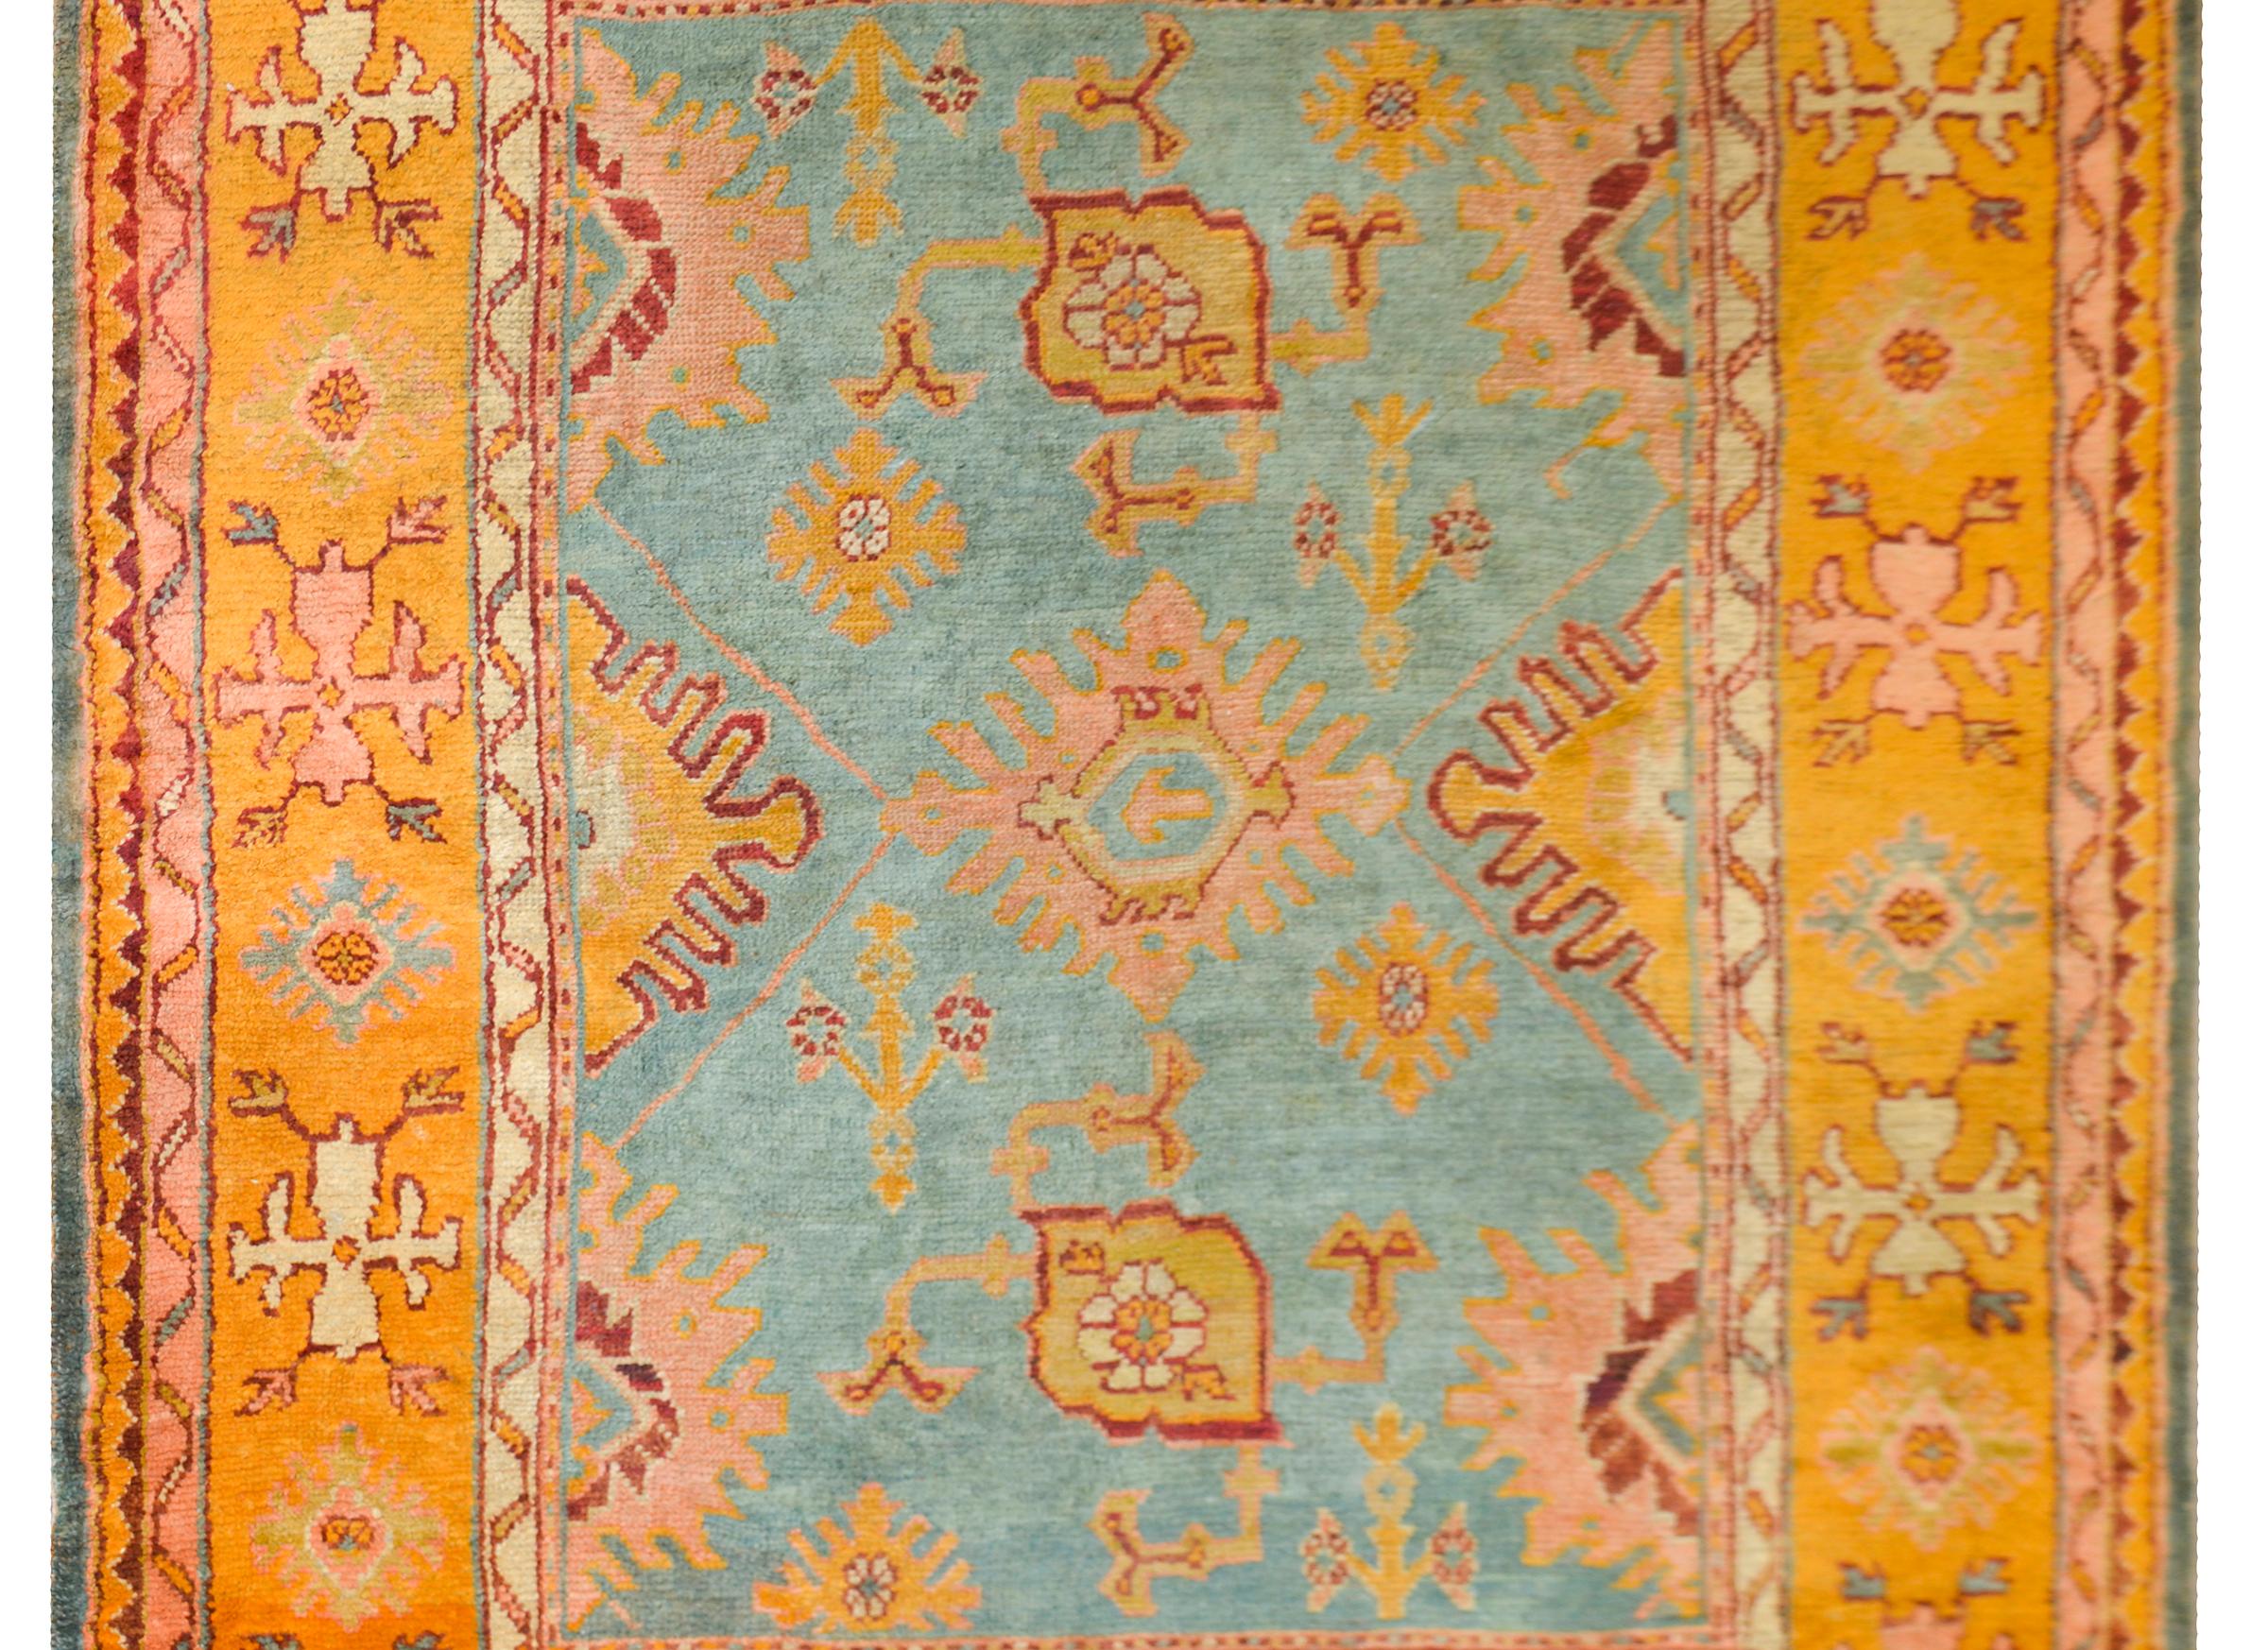 An exciting and bold early 20th century Turkish Oushak rug with a wonderful large-scale stylized floral patterned field woven in gold, crimson, and salmon, and set against a light turquoise blue field. The border is exceptional with a wide stylized